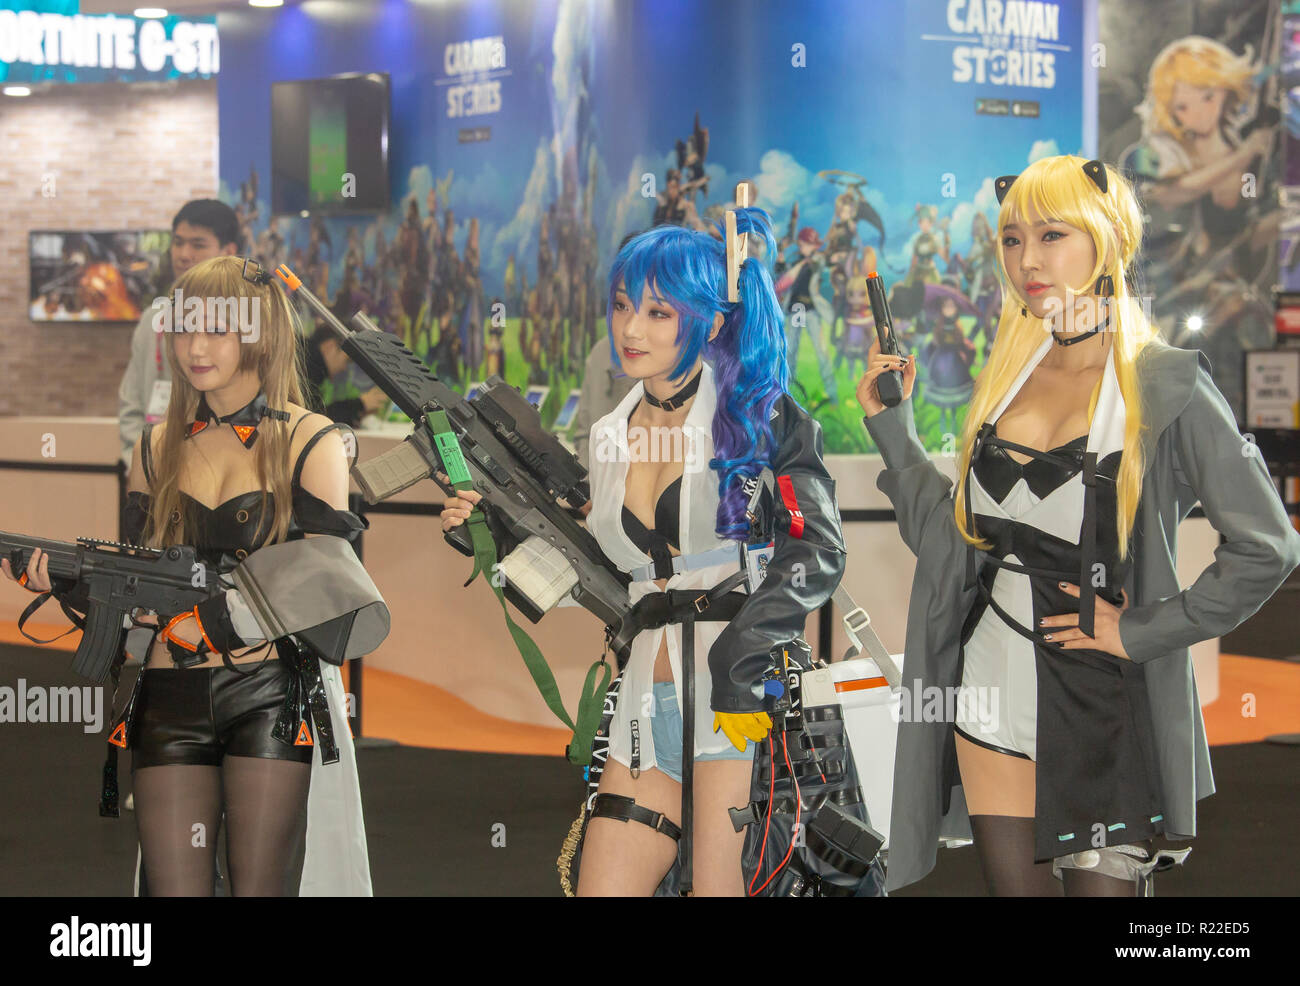 G-Star Global Game Exhibition, Nov 15, 2018 : Promotional models wearing  the costumes of online games pose at the G-Star Global Game Exhibition in  Busan, about 420 km (261 miles) southeast of